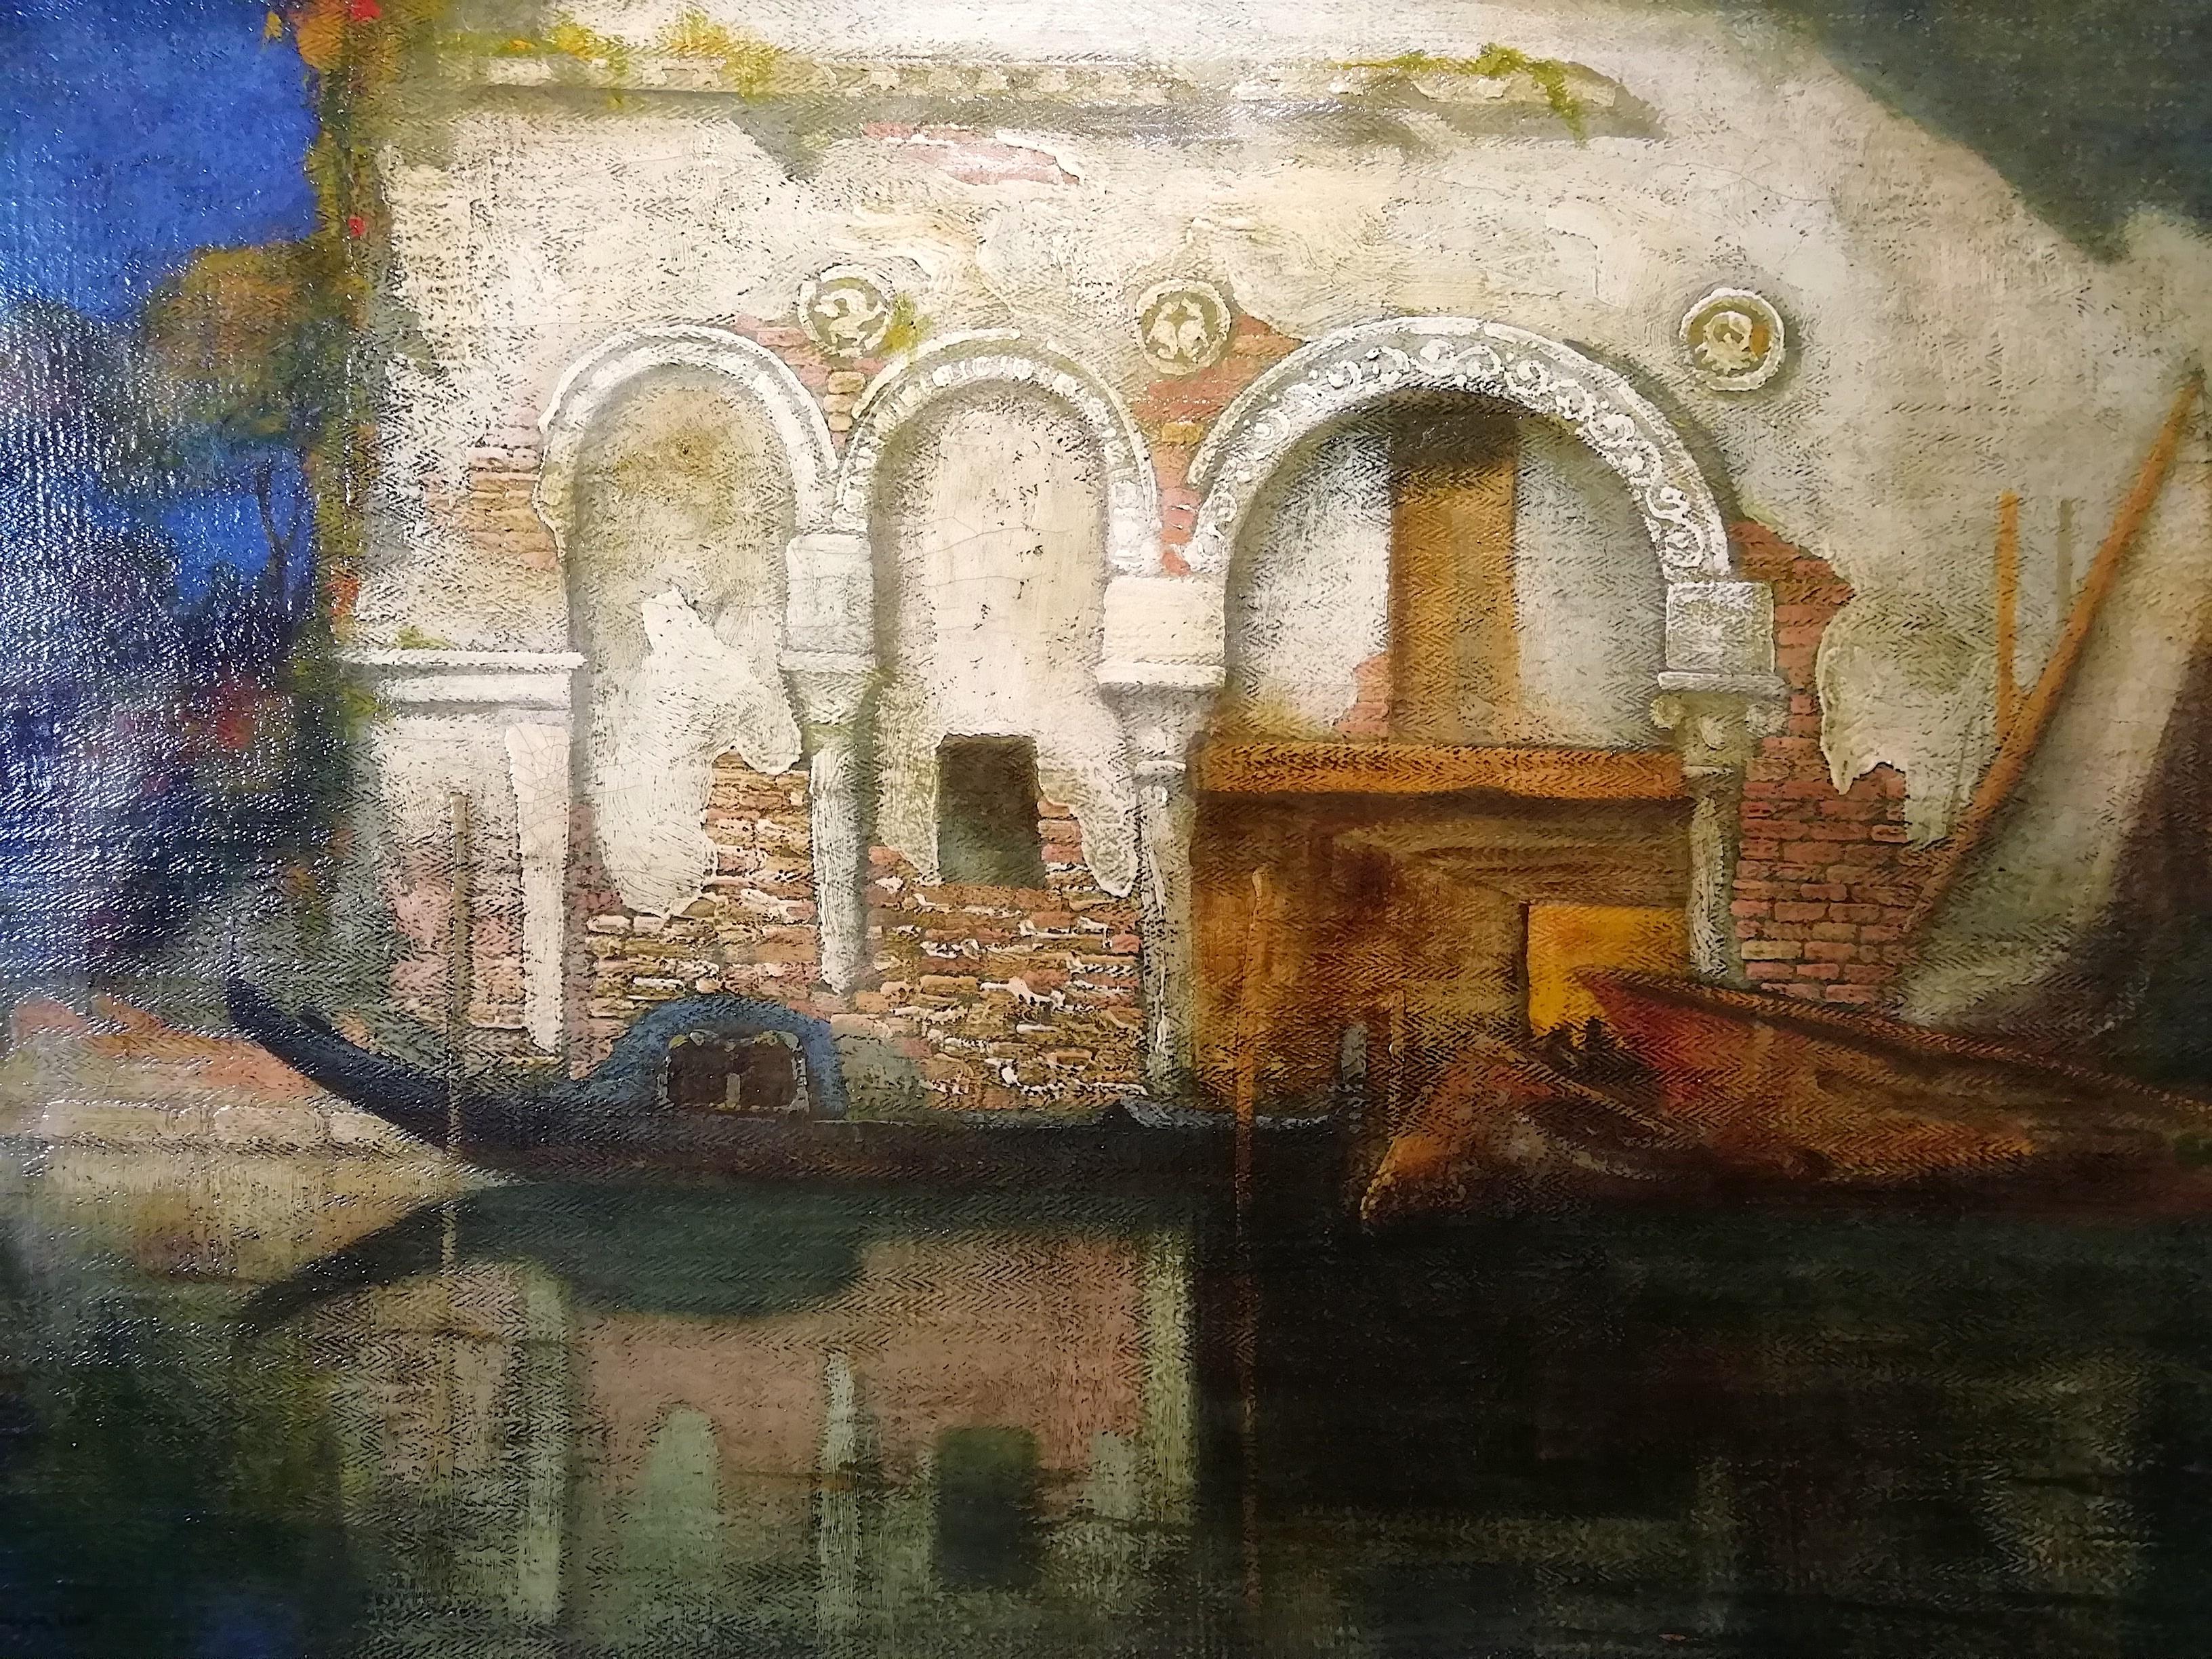 Gennaro Favai (Venezia 1879 - Venezia 1958)
Palace Cà da Mosto in Venice
Signed and dated lower left: G Favai Venezia 1909

In 1900 he was awarded a medal at the San Francisco International Exposition; in 1904, probably always encouraged by De